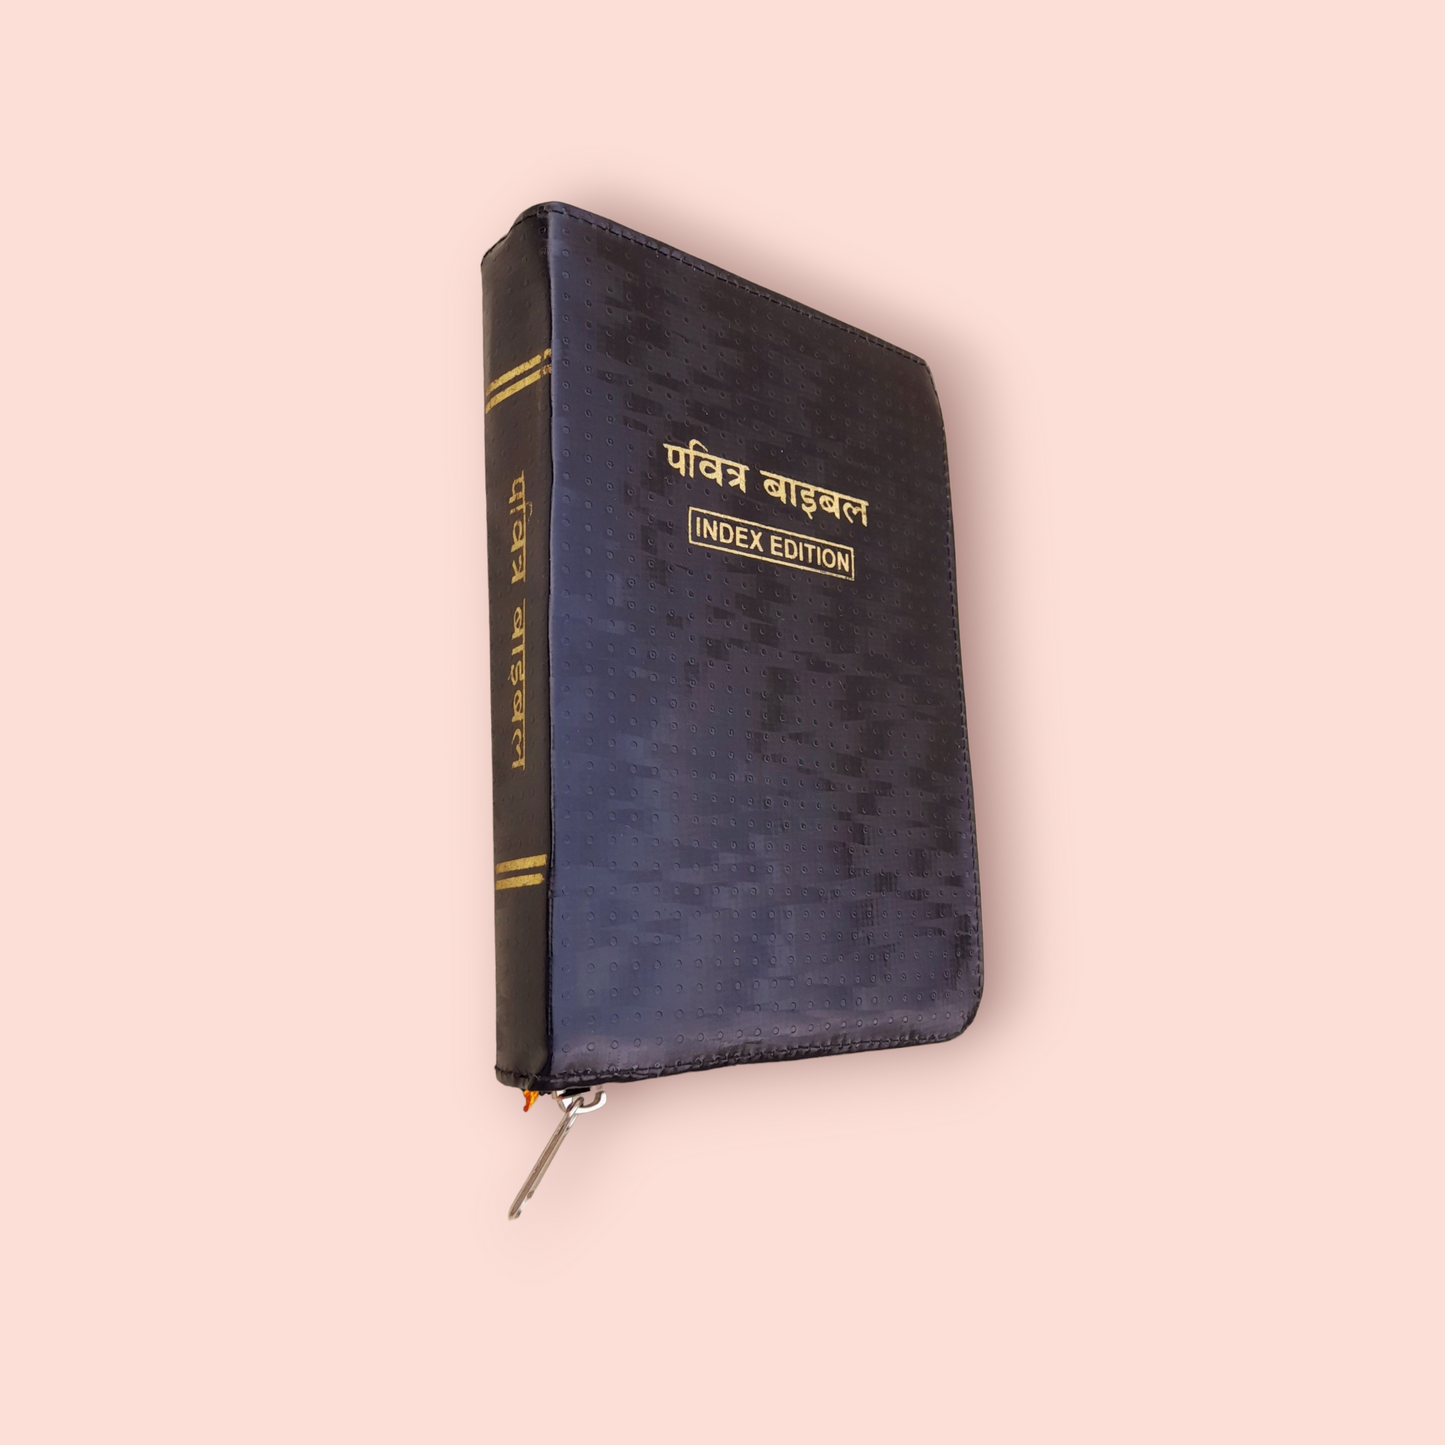 Small Hindi Bible With Thumb Index Black Color Bound